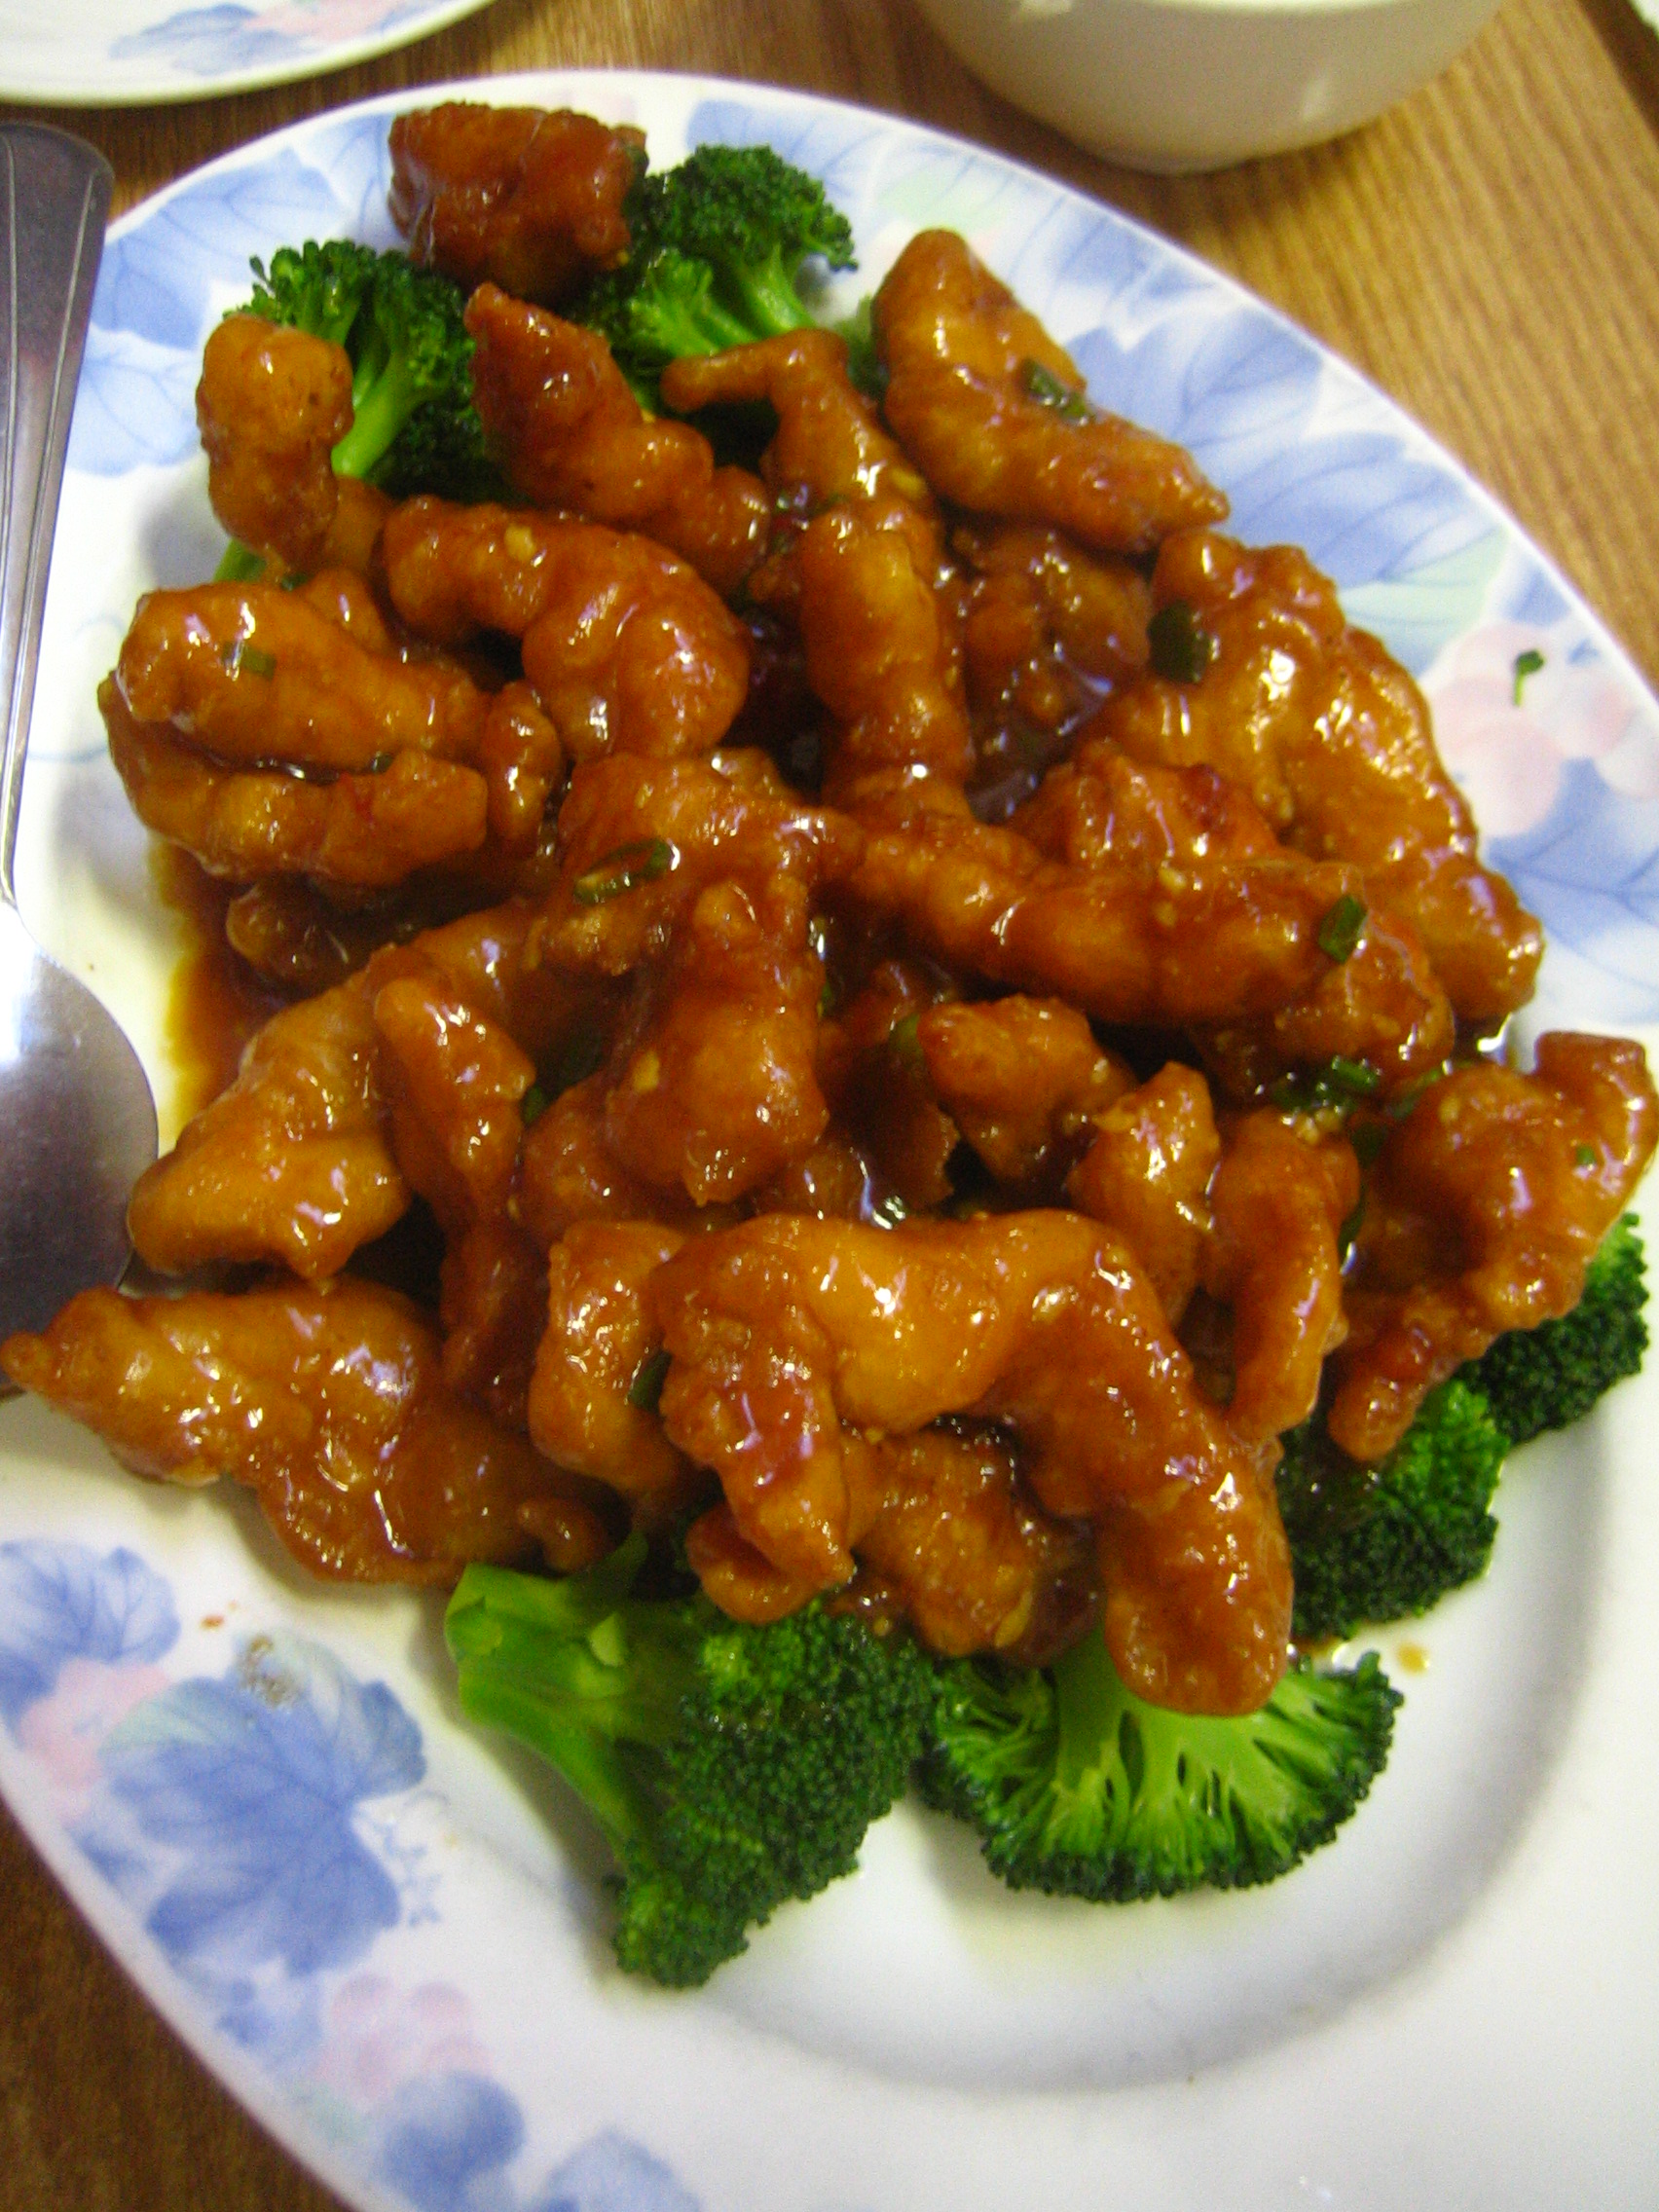 File:Flickr spine 472065553--General Tso's  - Wikimedia Commons